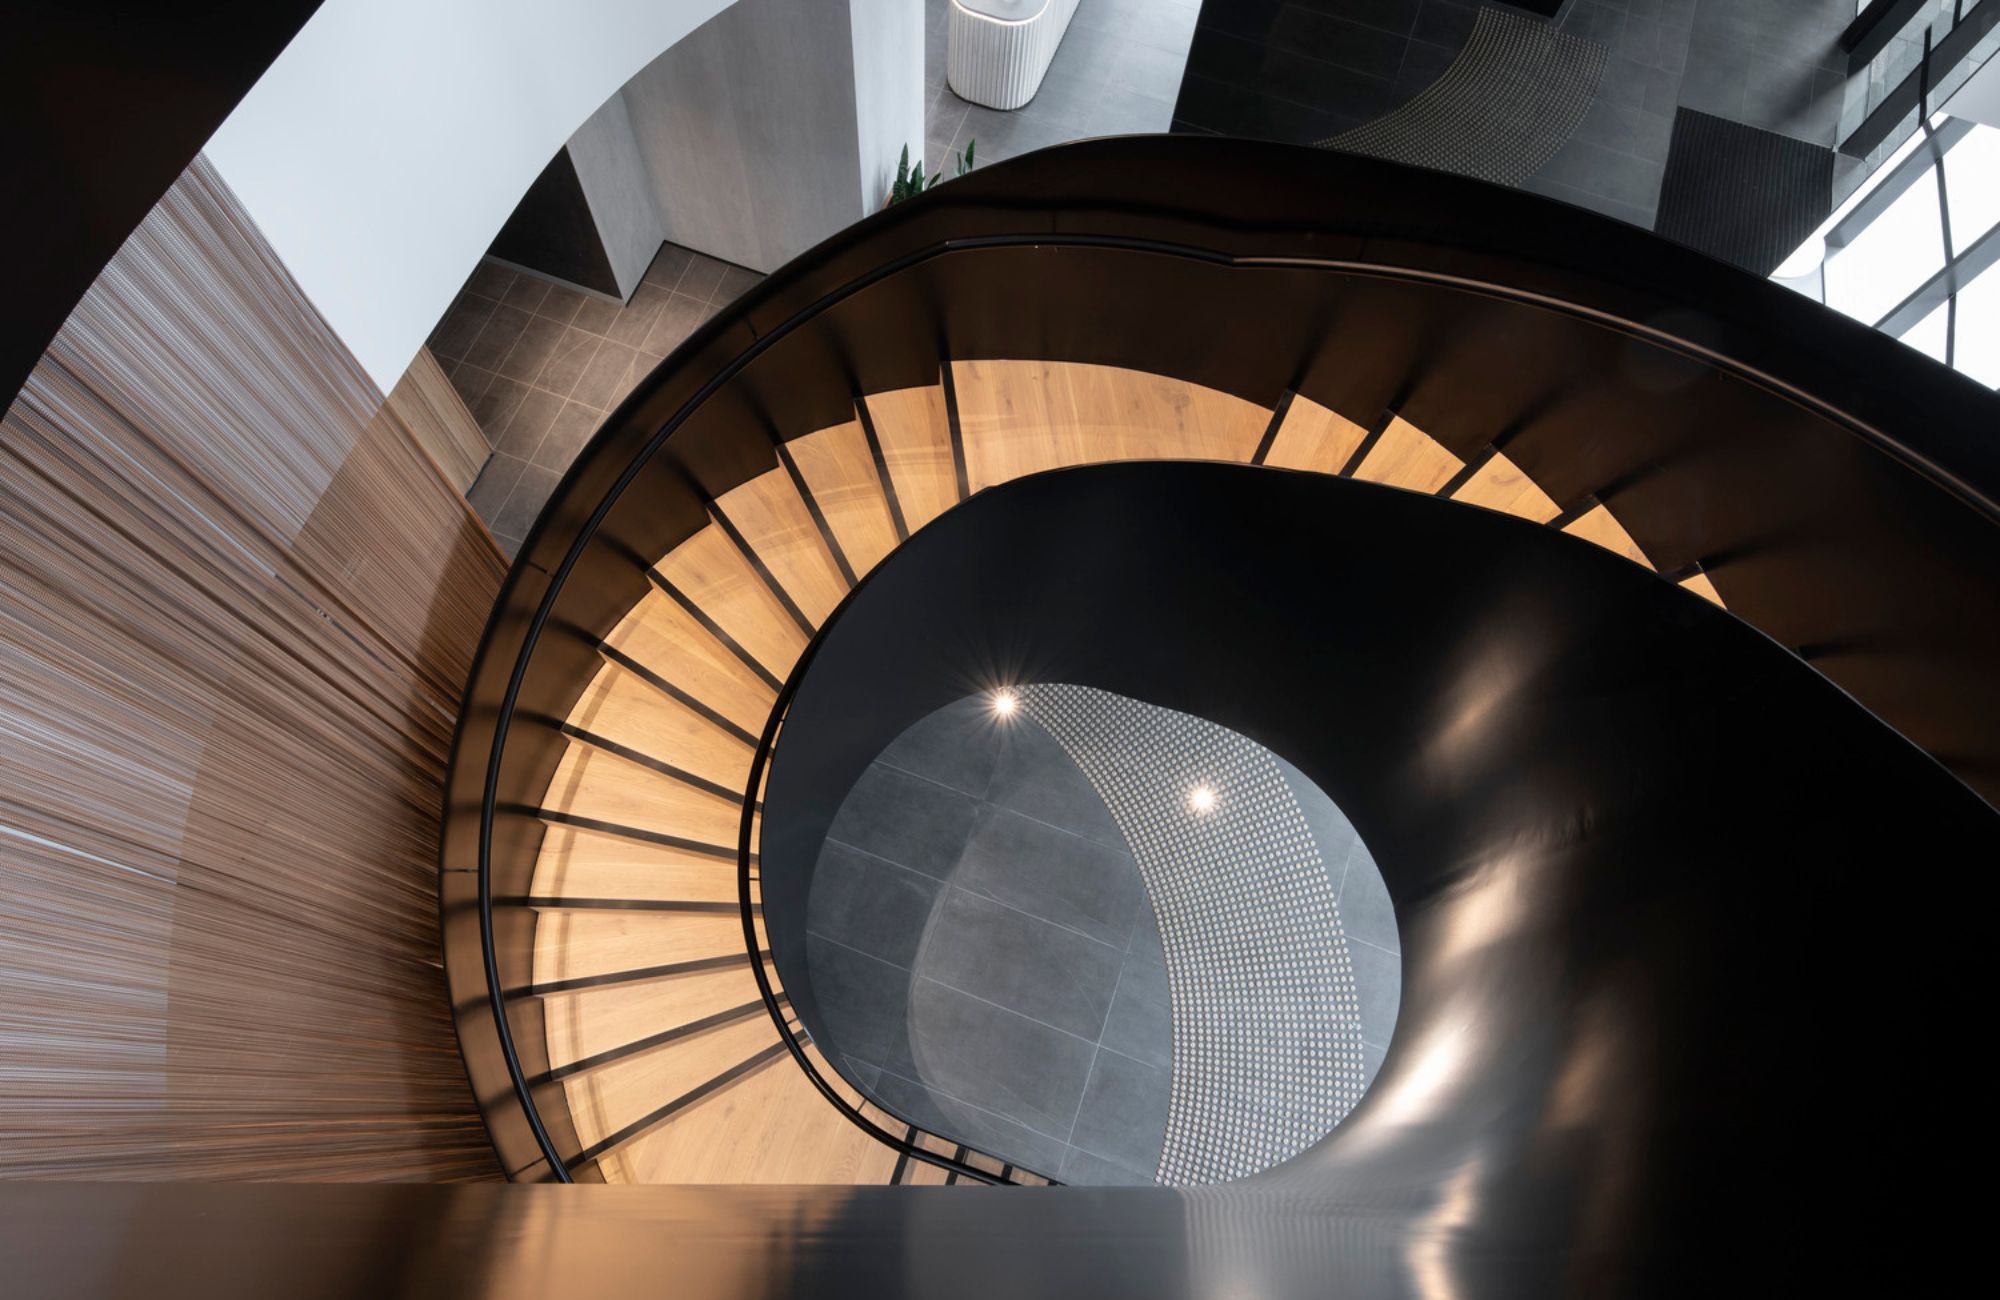 The Langston Residence by Architectus. Birds eye view of the Lanston's spiral staircase